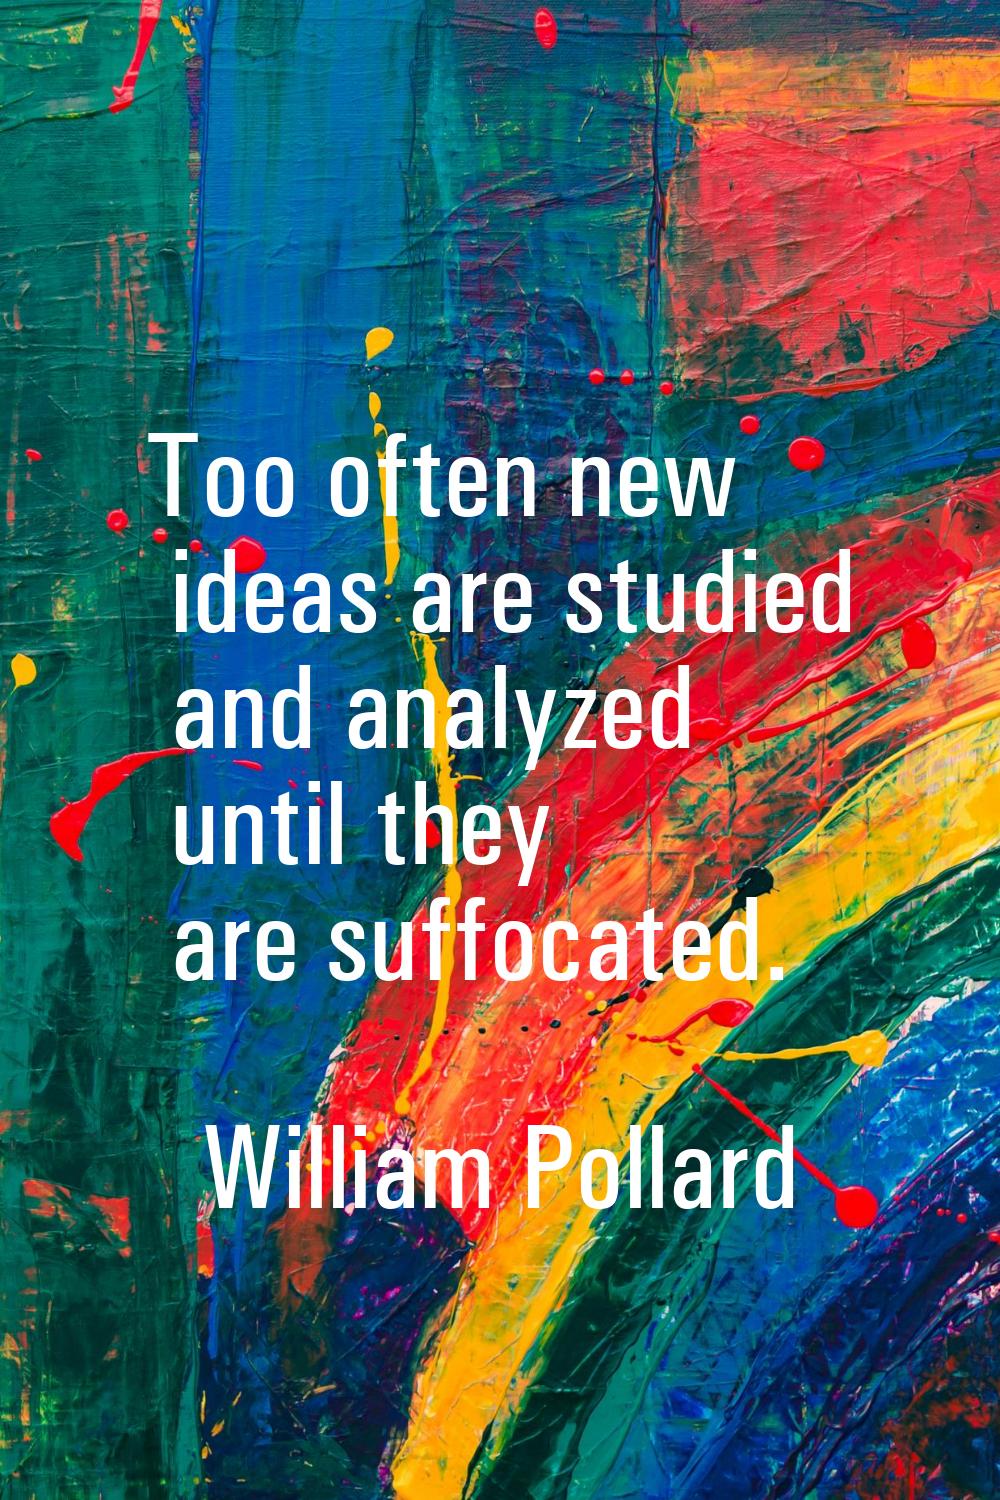 Too often new ideas are studied and analyzed until they are suffocated.